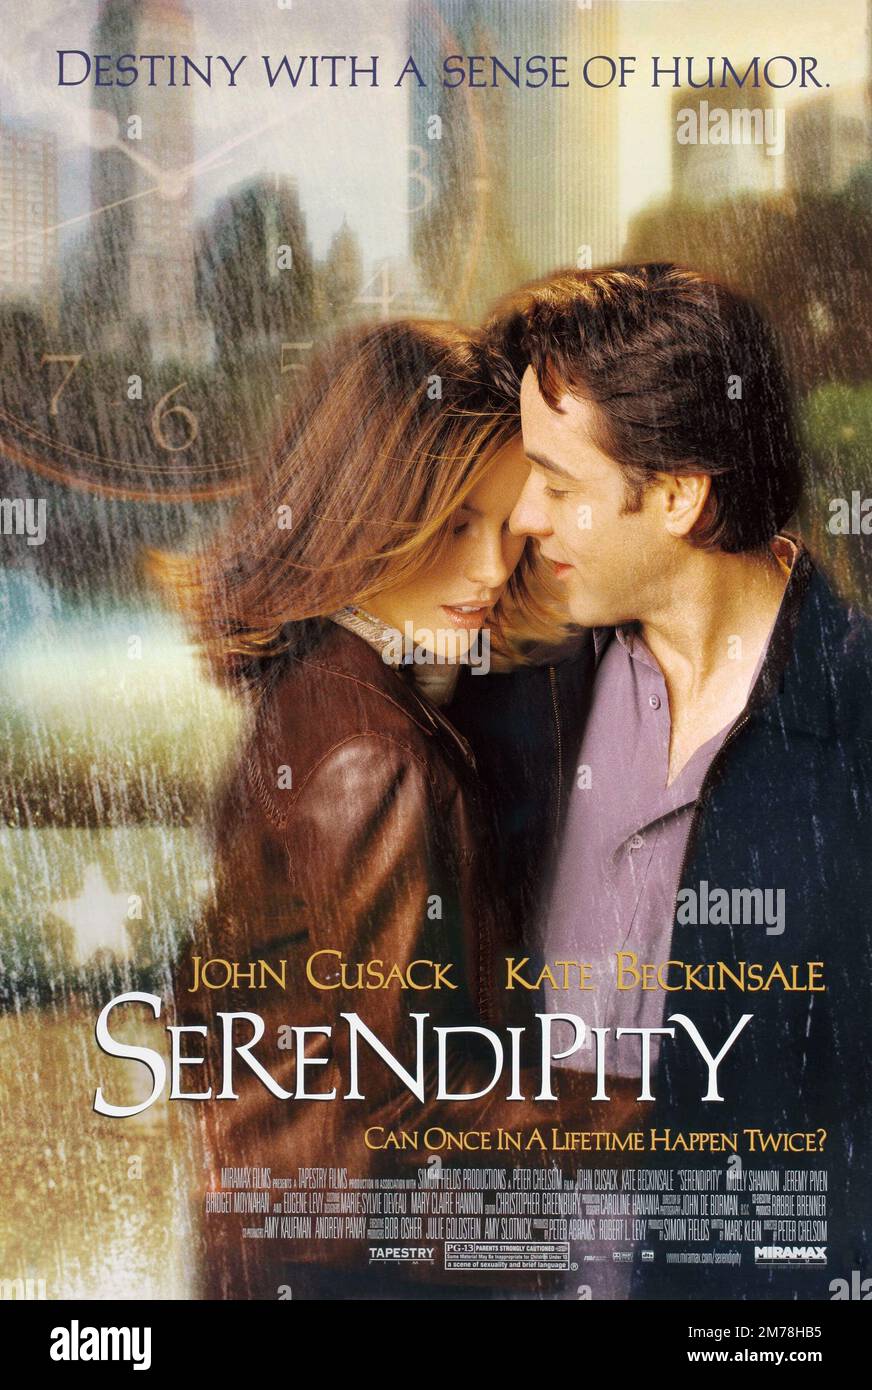 JOHN CUSACK and KATE BECKINSALE in SERENDIPITY (2001), directed by PETER CHELSOM. Credit: SIMON FIELDS PRODUCTIONS/TAPESTRY FILMS / Album Stock Photo